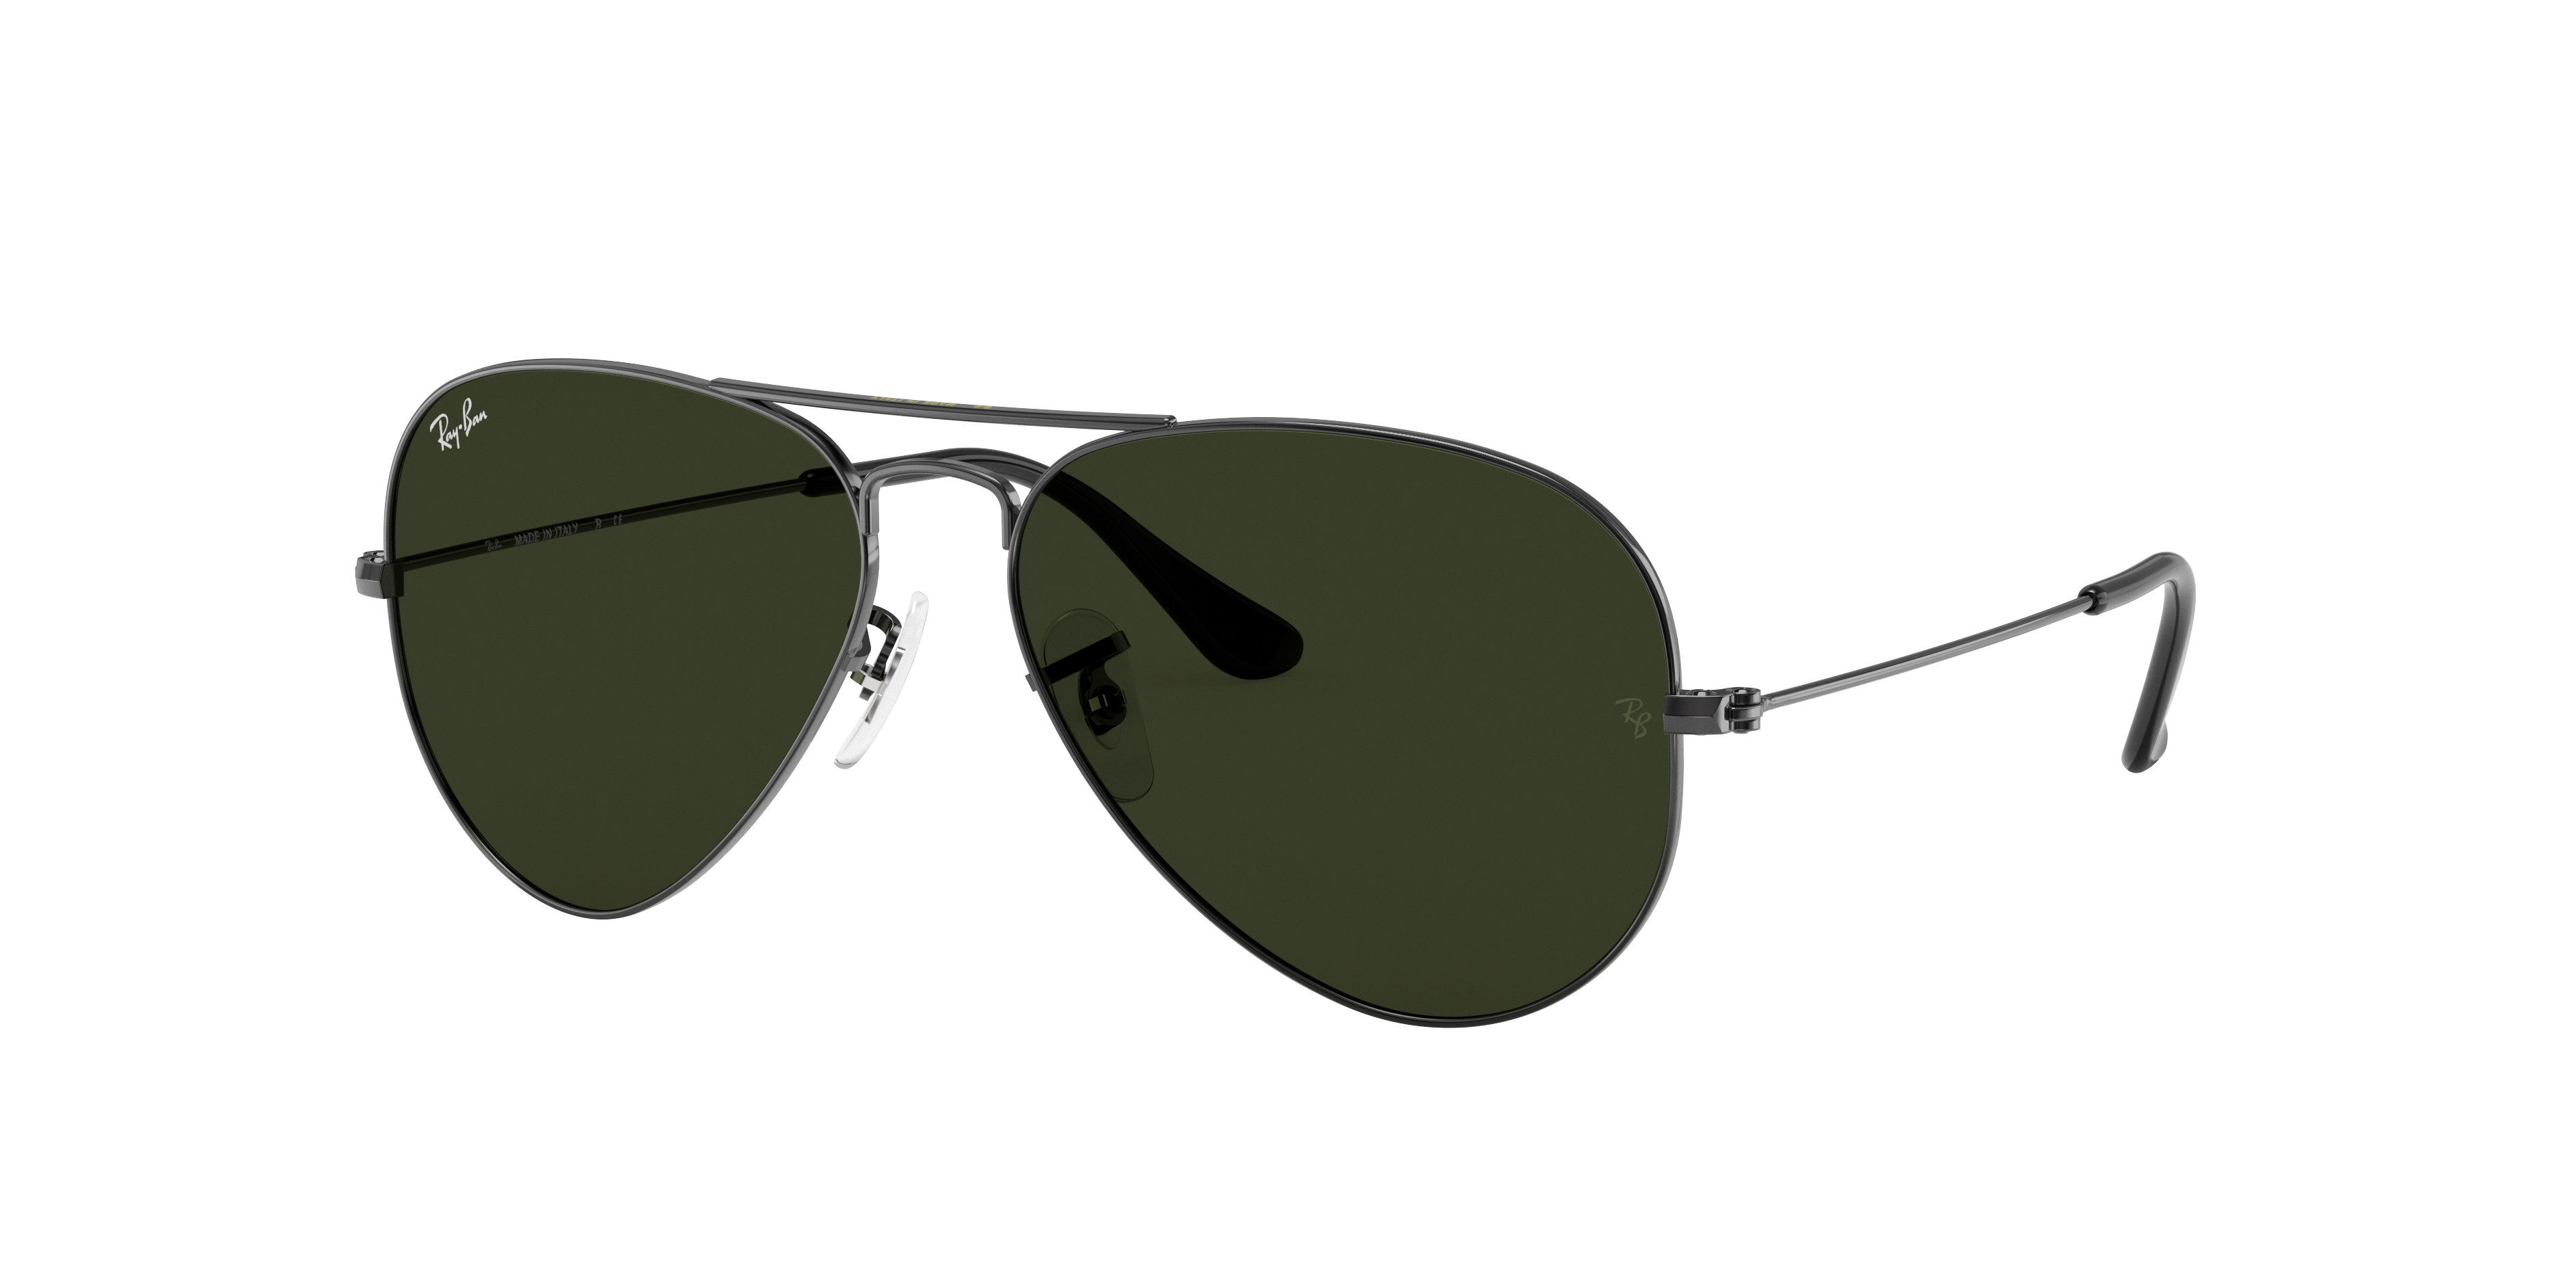 what size ray ban aviators should i get